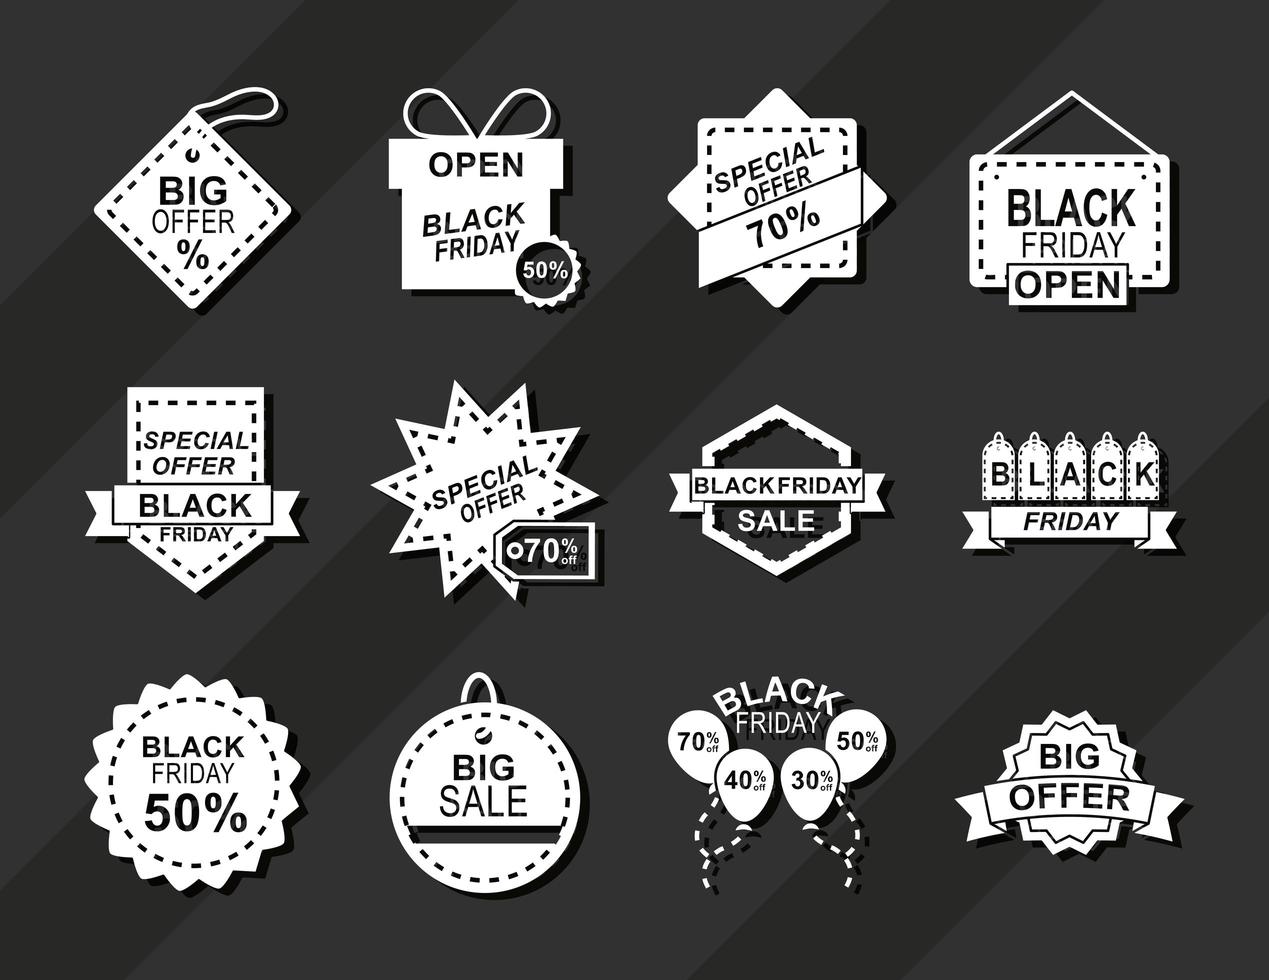 black friday announce season discount offer icons on dark background silhouette style vector